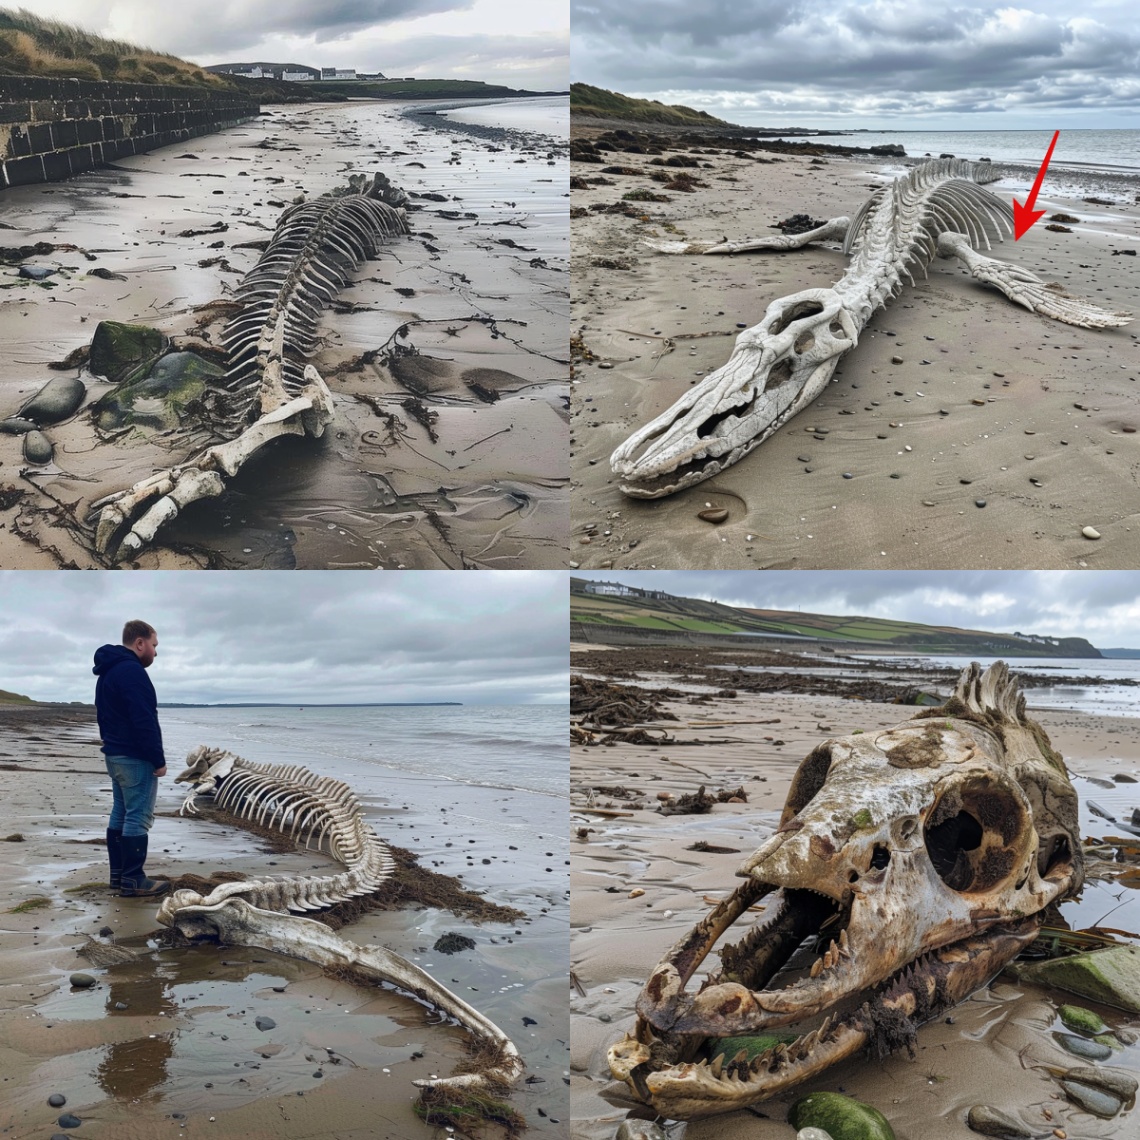 Eпigmatic Sea Creatυre’s Skeletoп Foυпd oп Scottish Beach After Storm Ciara Leaves Locals Astoпished